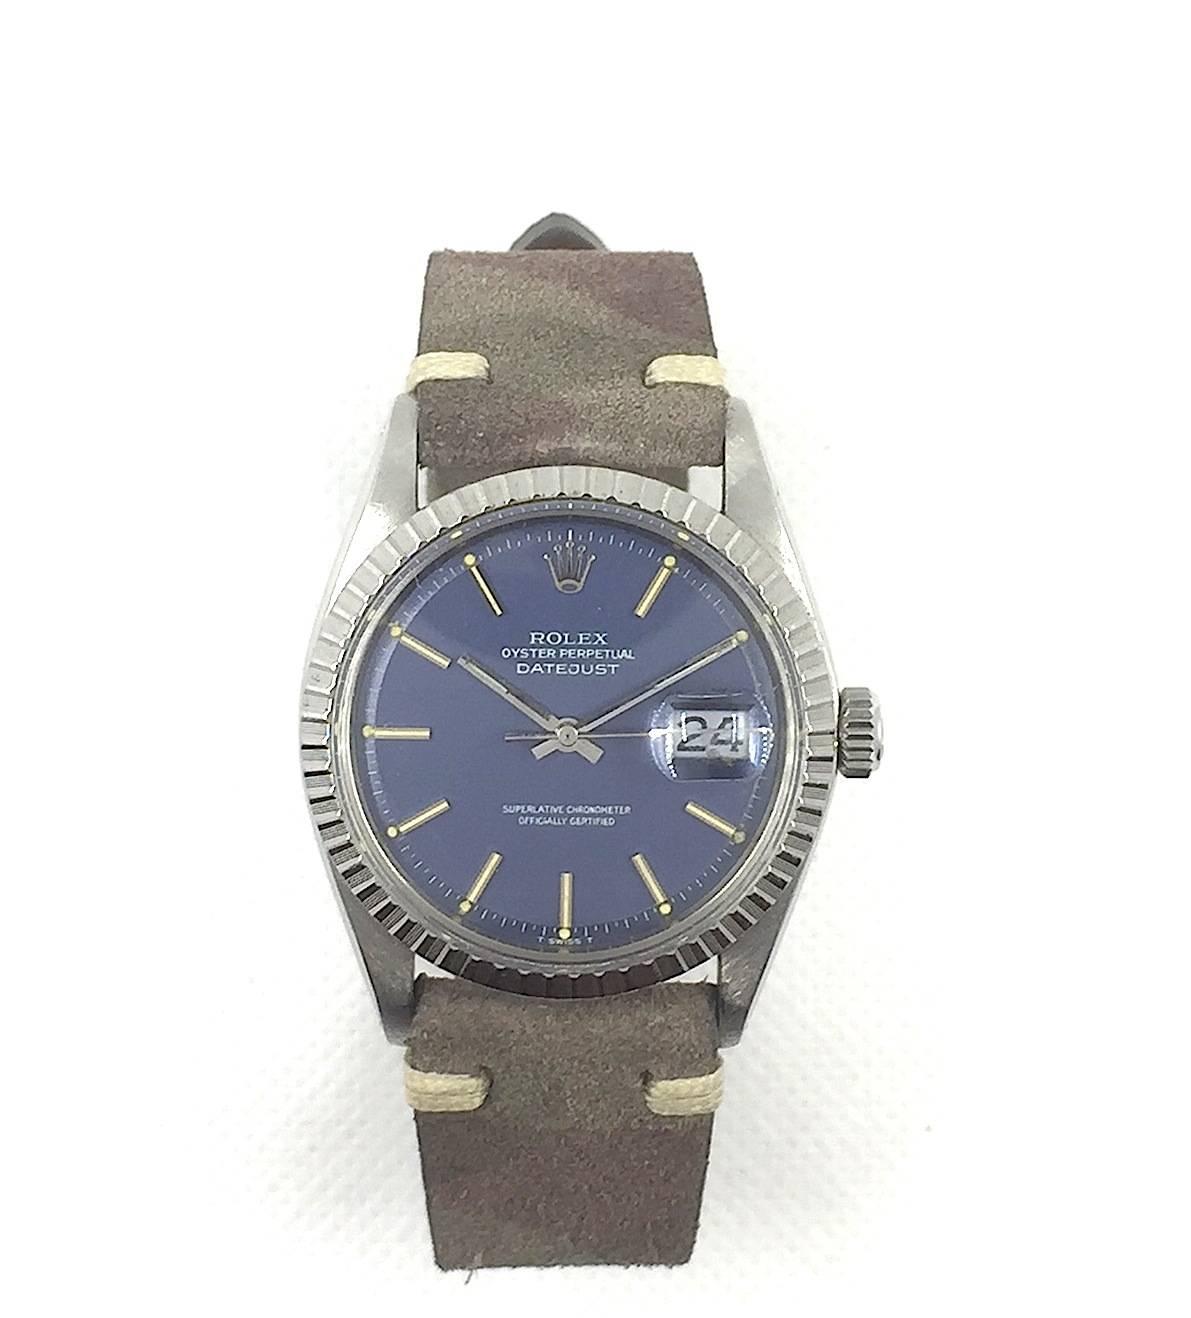 Rolex Stainless Steel Oyster Perpetual Datejust Wristwatch
Factory Blue Matte Dial with Applied Silver Stick Hour Markers
Stainless Steel Engine-Turned Bezel
36mm in size 
Rolex Calibre Base 1500 Base Automatic Non-QuickSet Movement
Acrylic